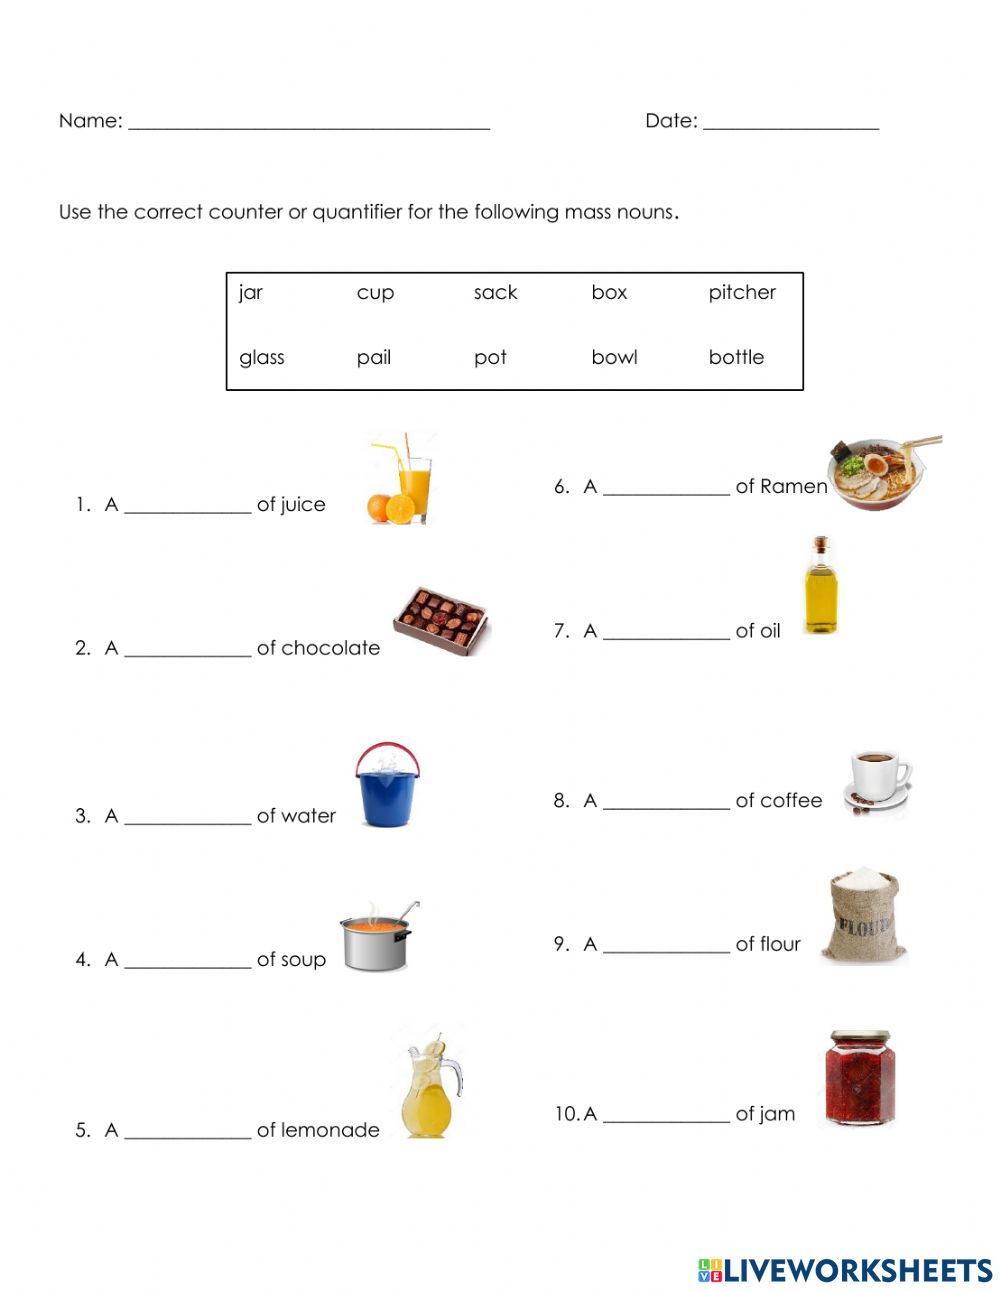 Count And Mass Nouns Worksheets For Grade 1 CountingWorksheets